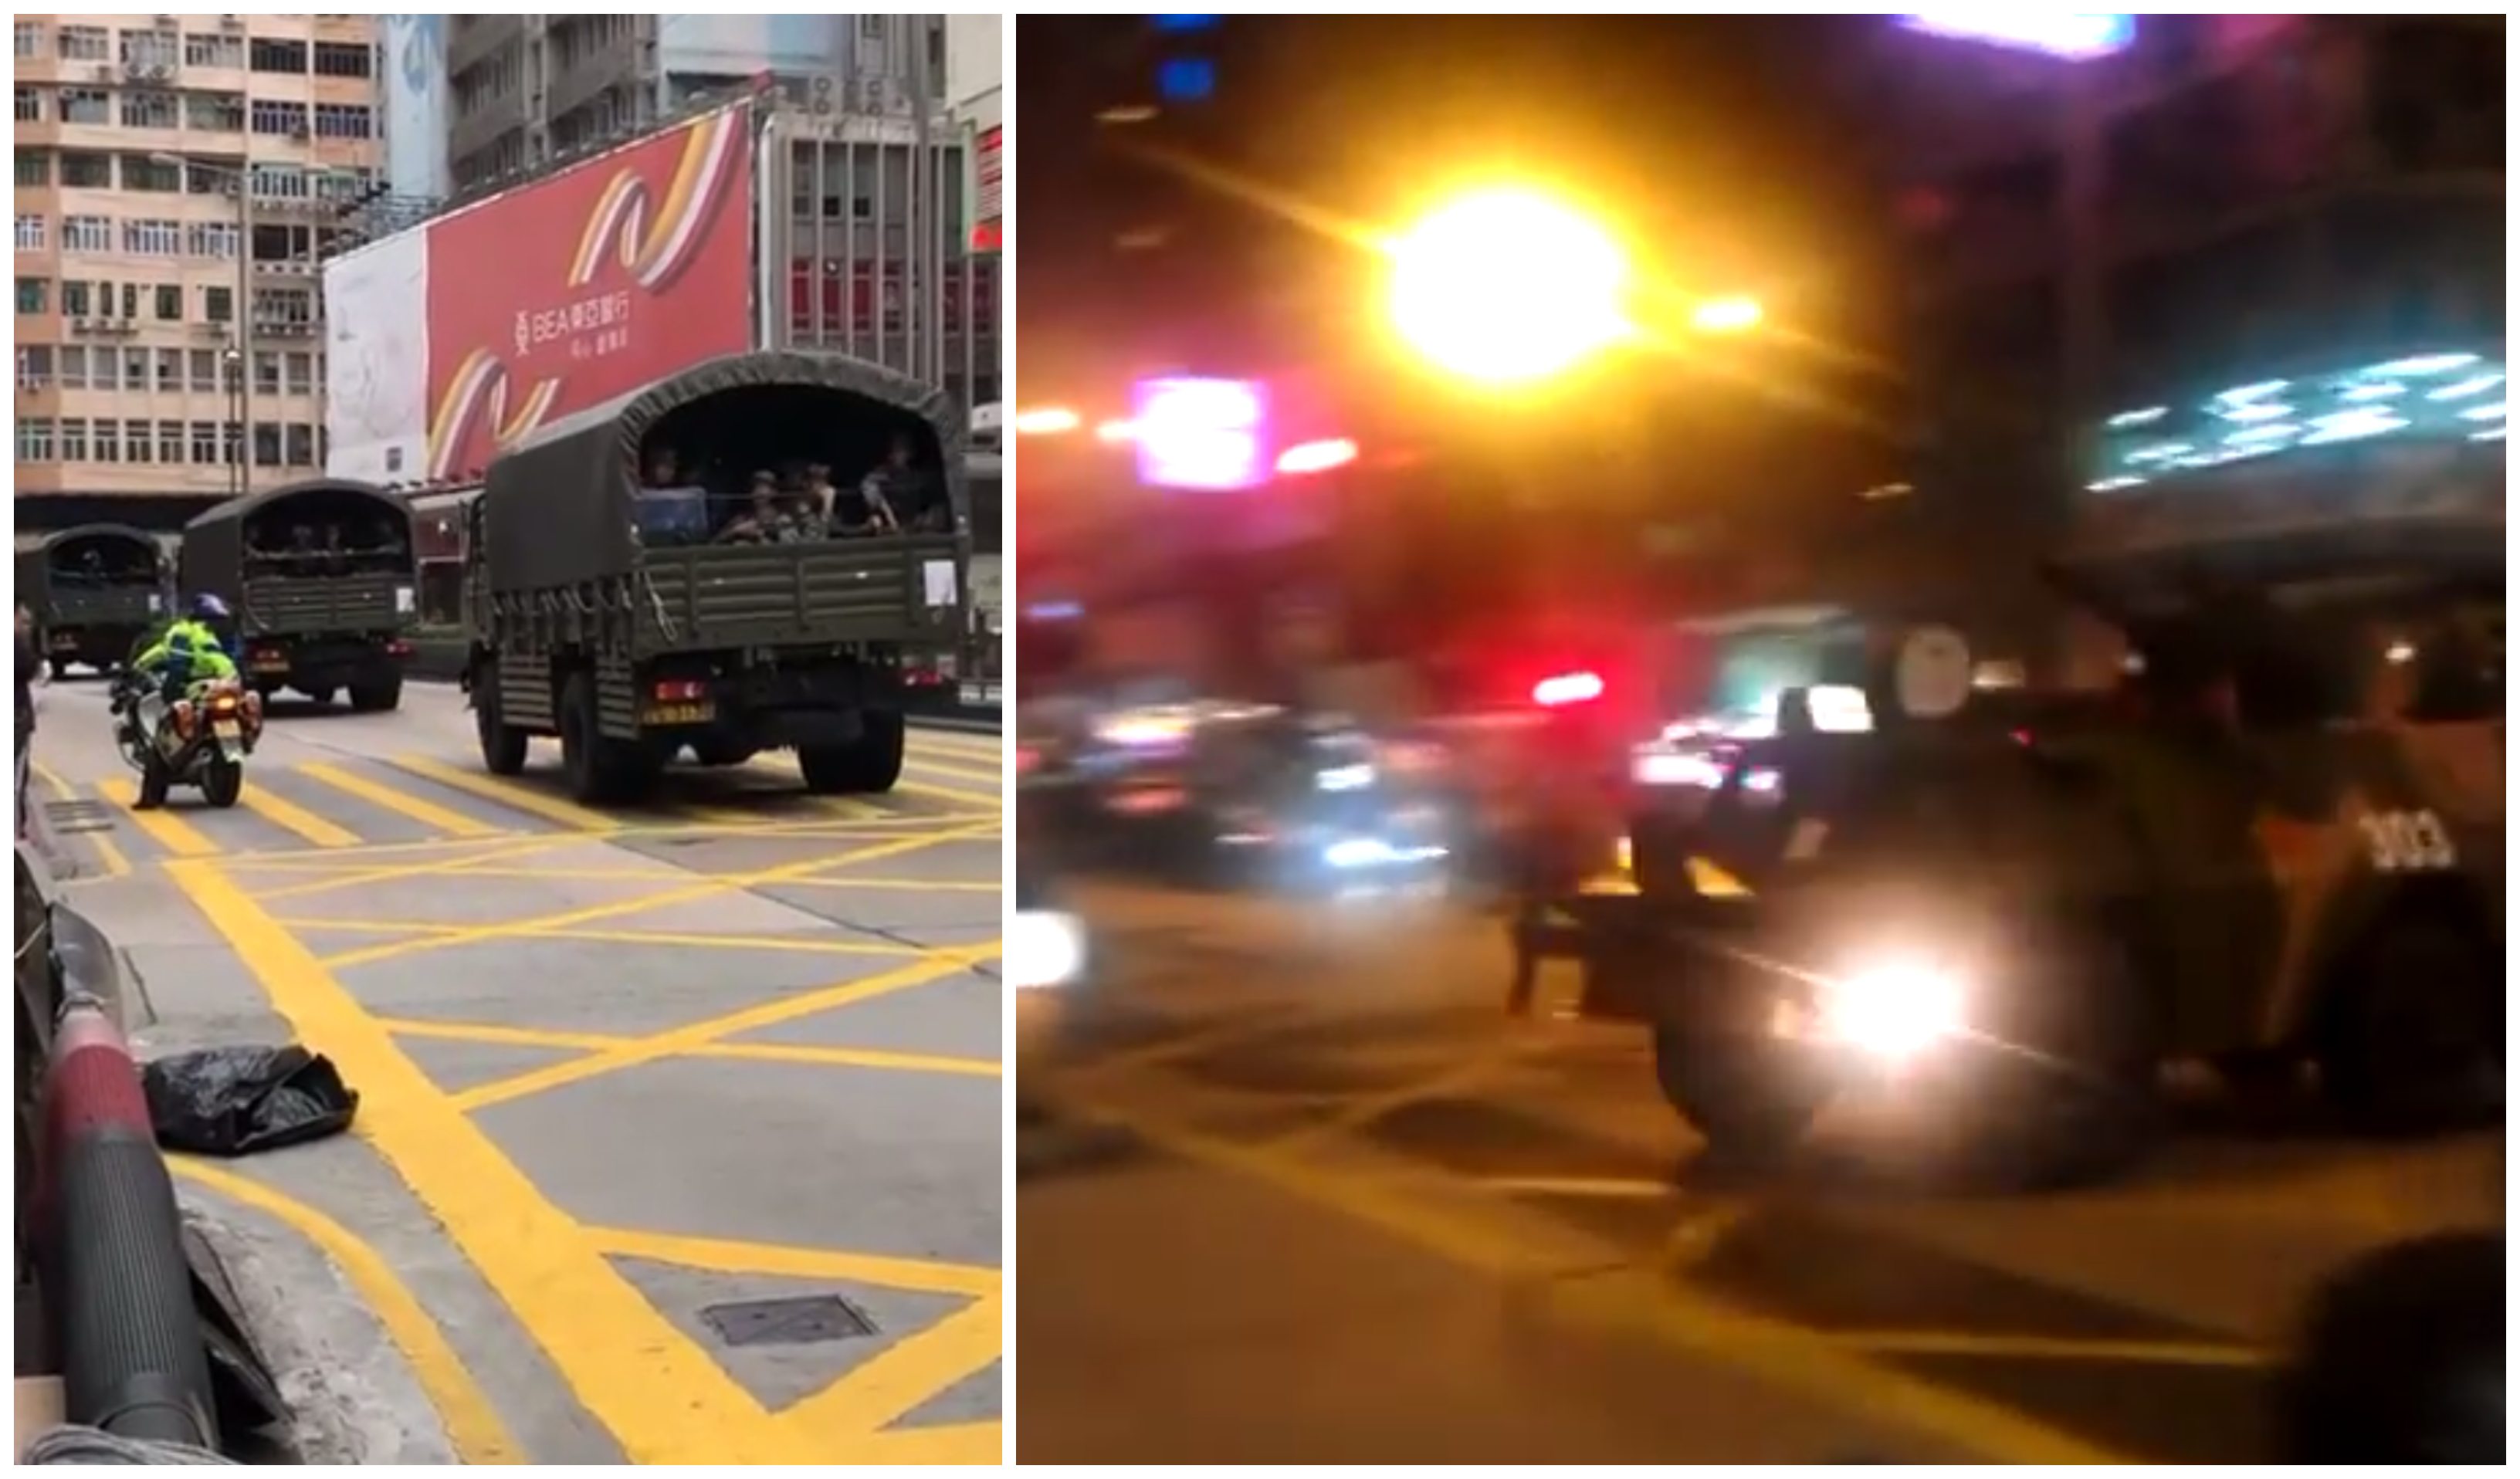 Stills from videos shot in 2012 (right) and 2018 (left) that have been falsely said in recent weeks to show an invasion of Hong Kong by PLA forces in response to the city’s protest movement. Screengrabs via YouTube.